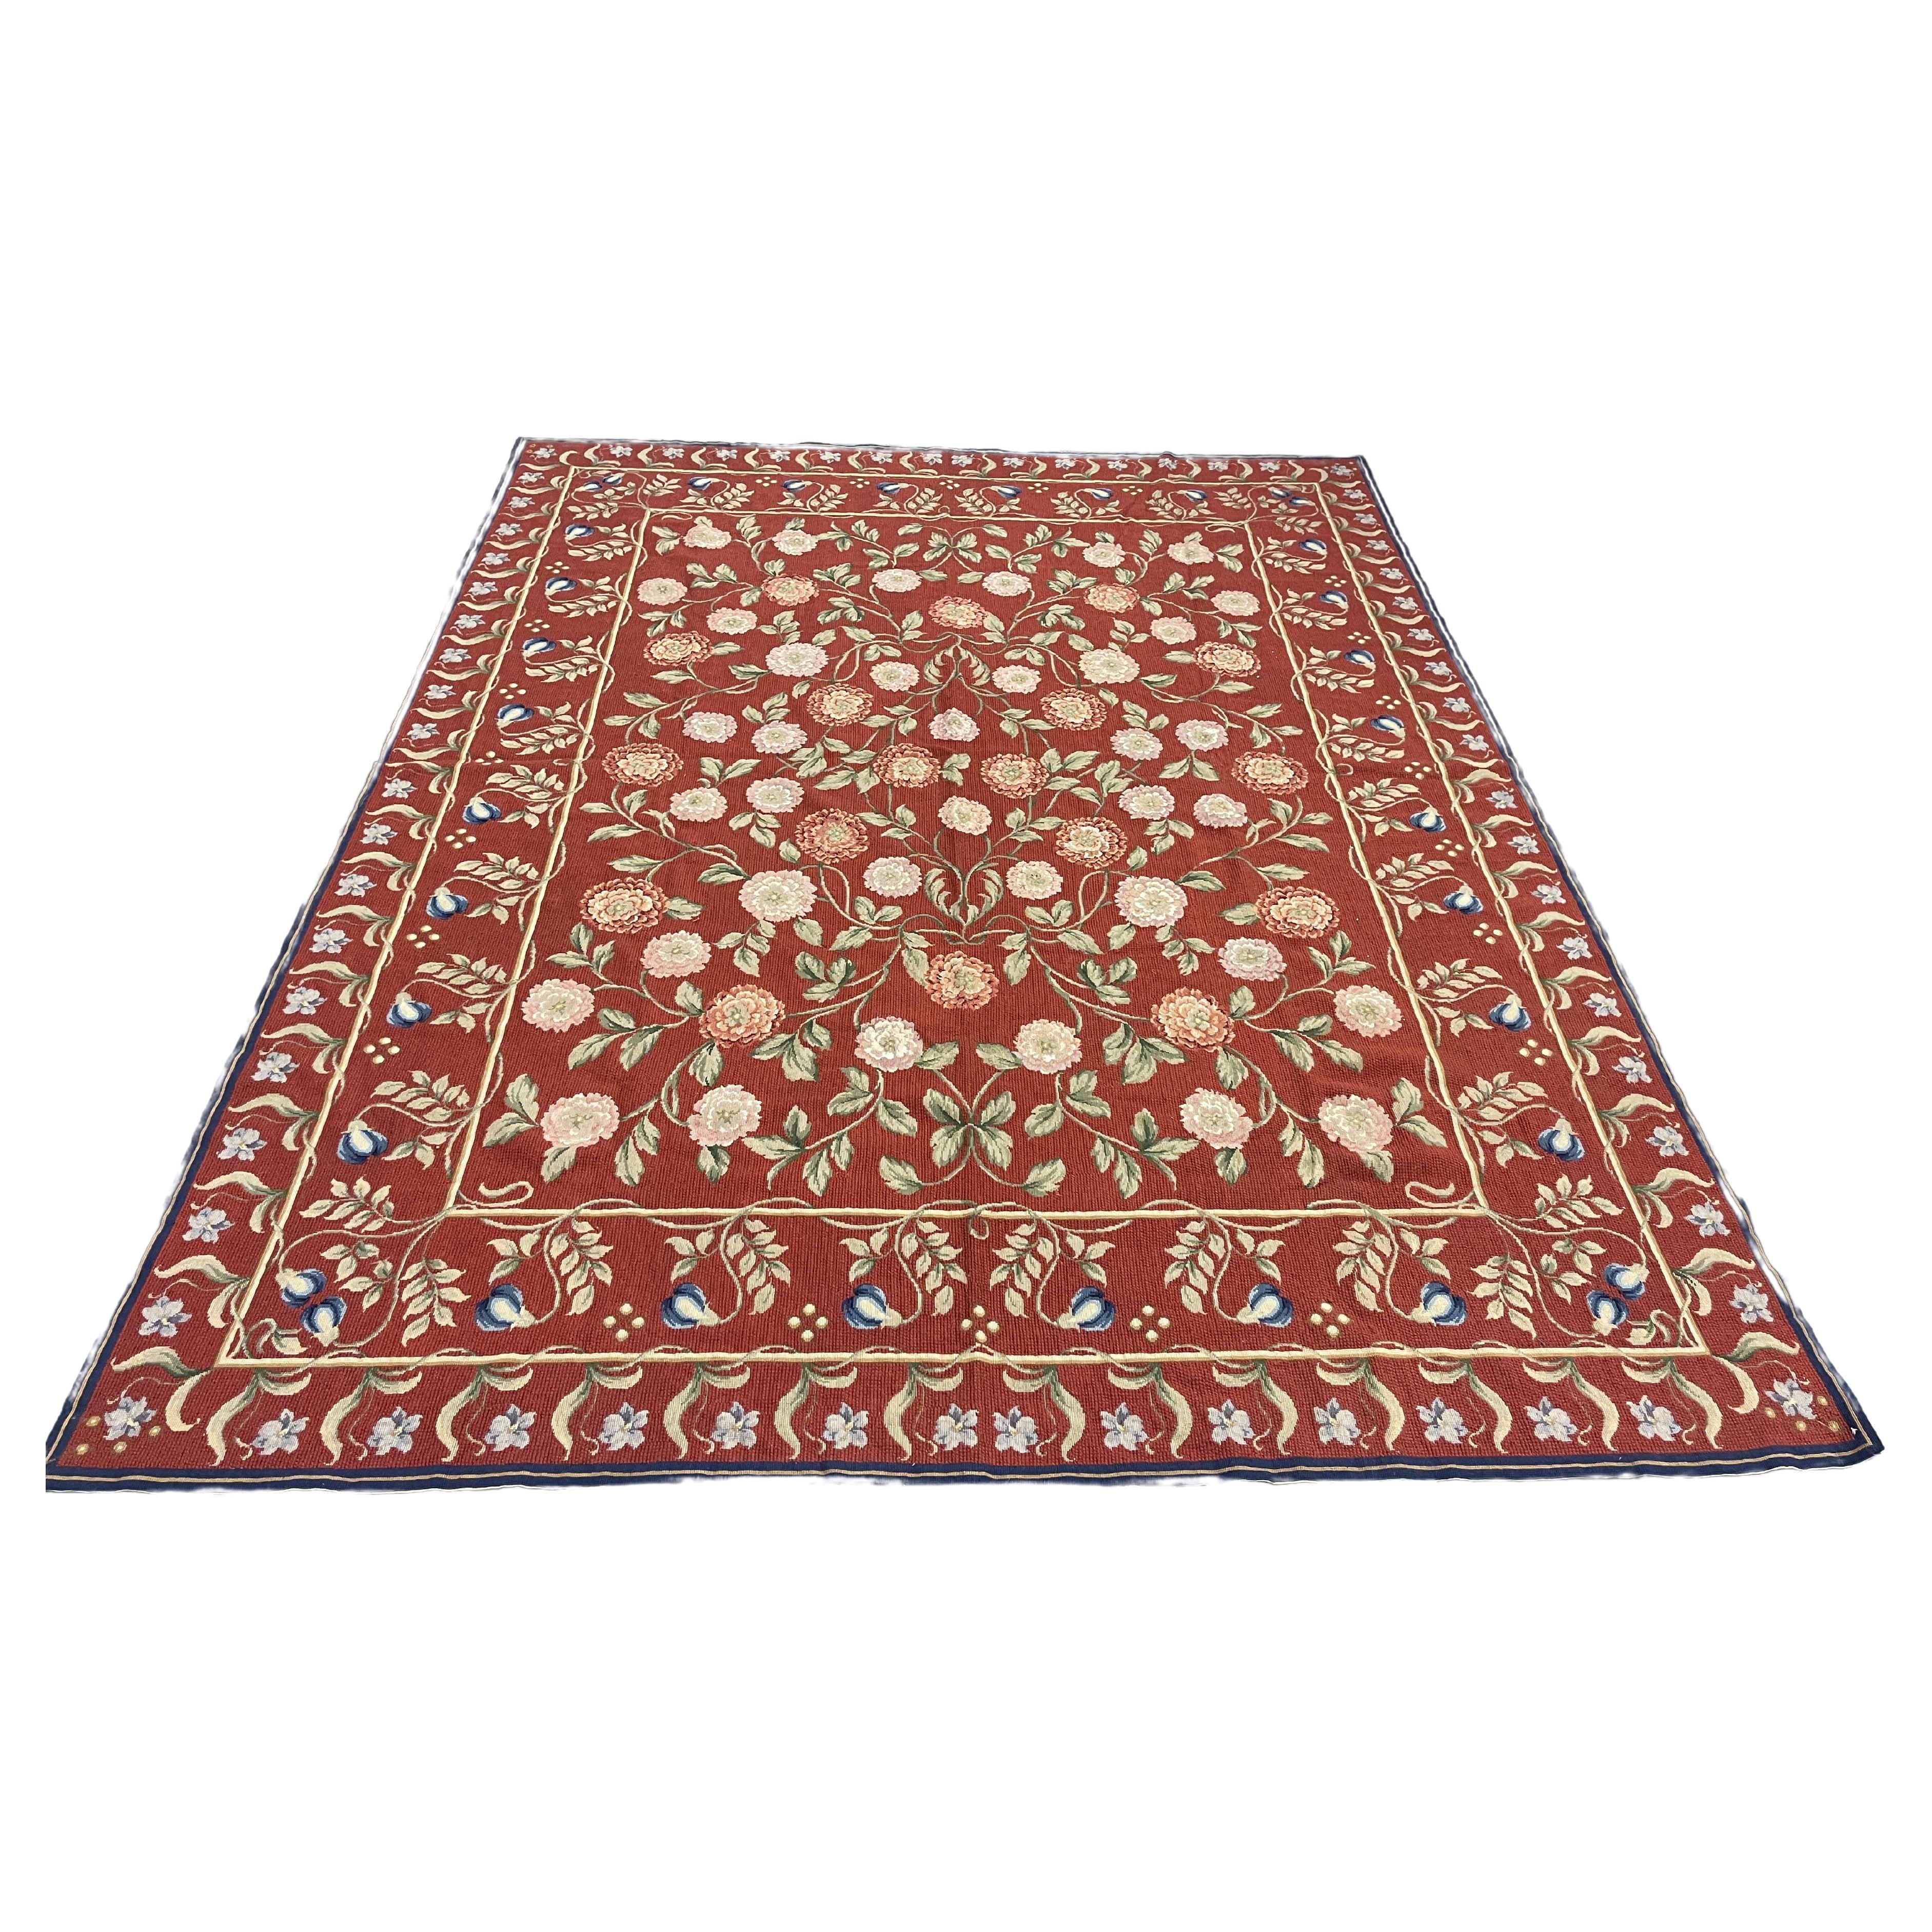 Traditional Carpet Aubusson Style Area Rug Handwoven Wool Needlepoint For Sale